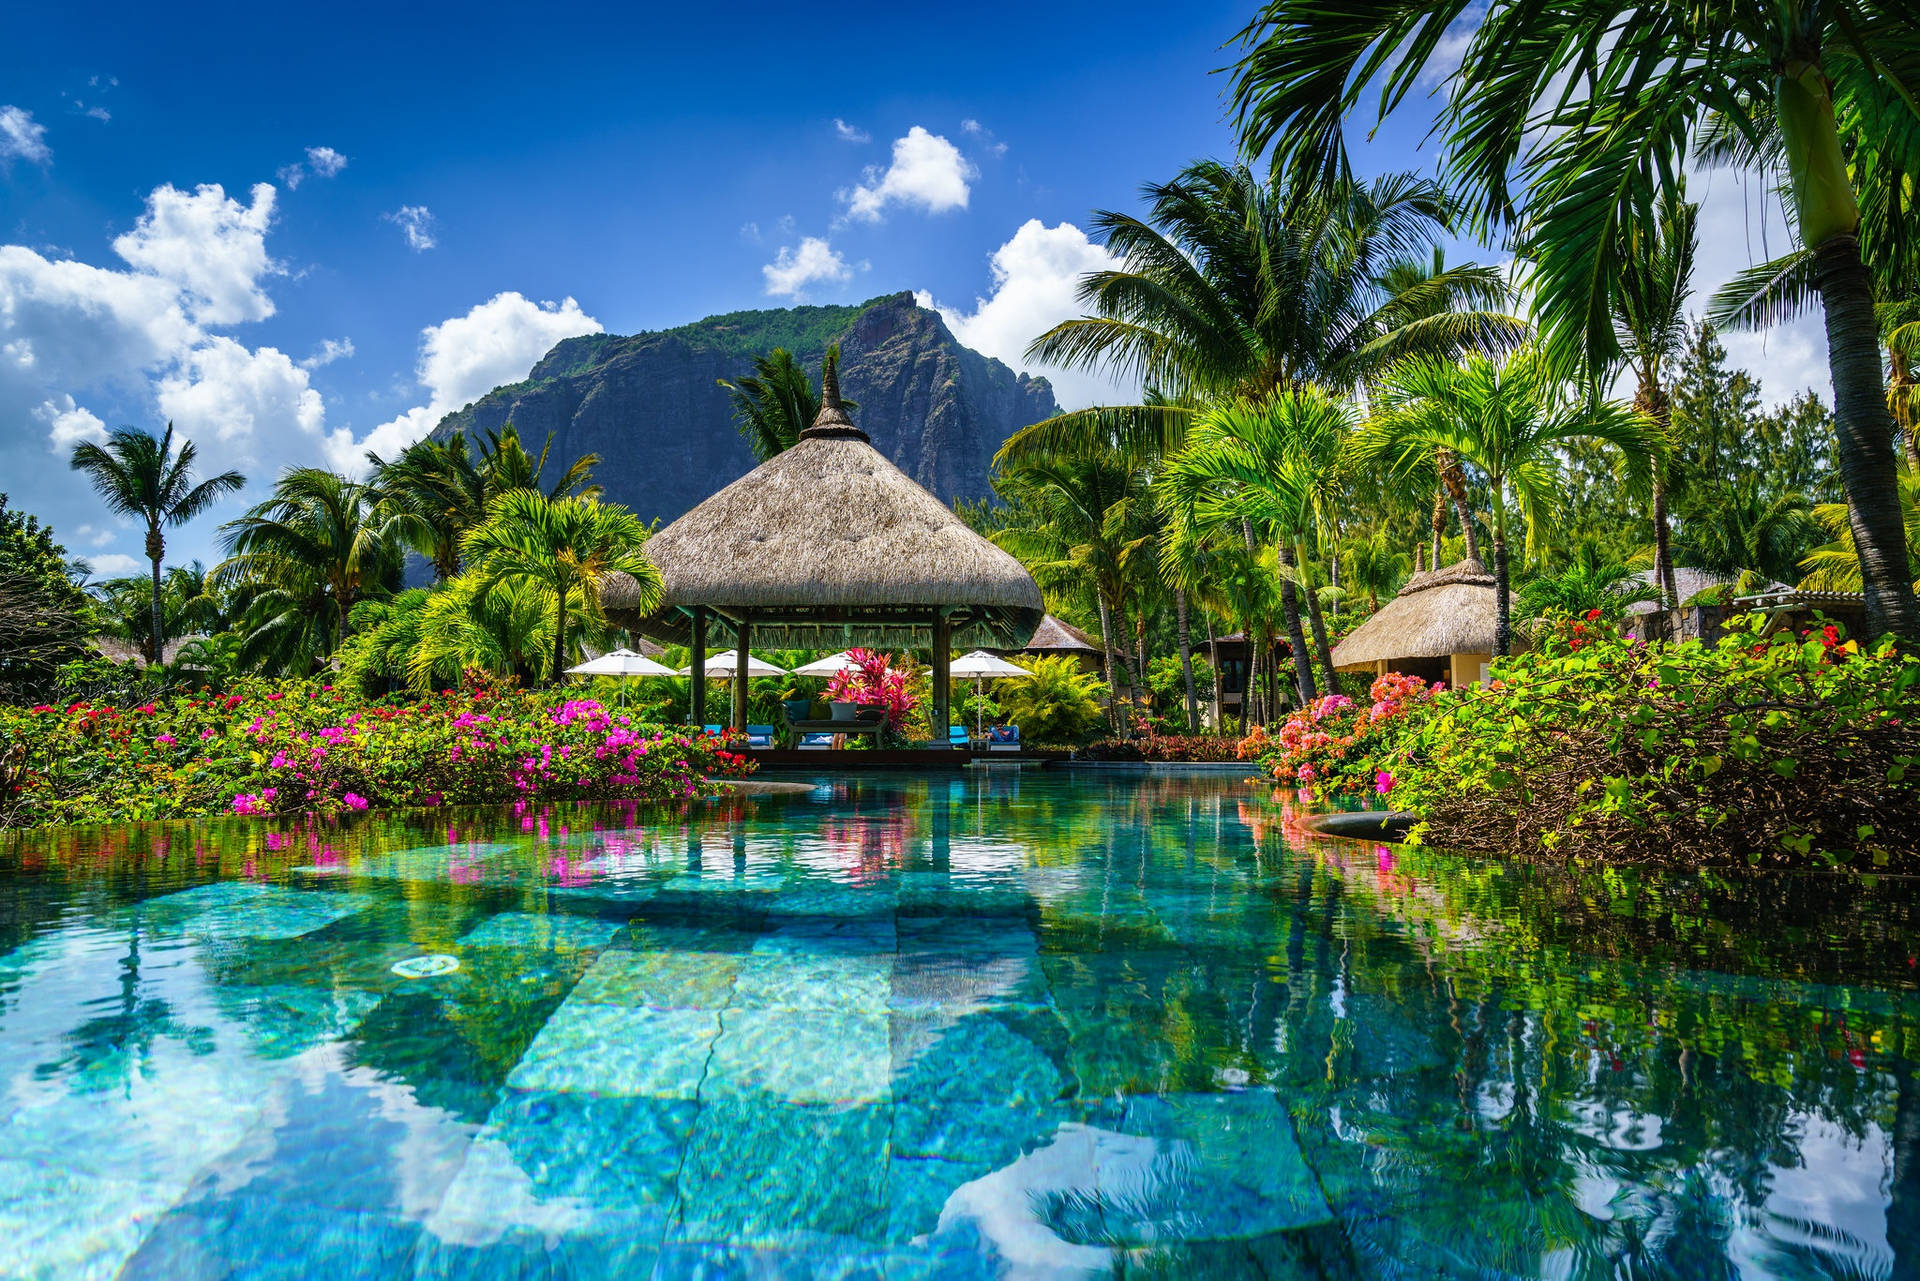 Poolpå Mauritius (note: This Sentence Is Already Correct In Swedish And Does Not Require Any Translation) Wallpaper